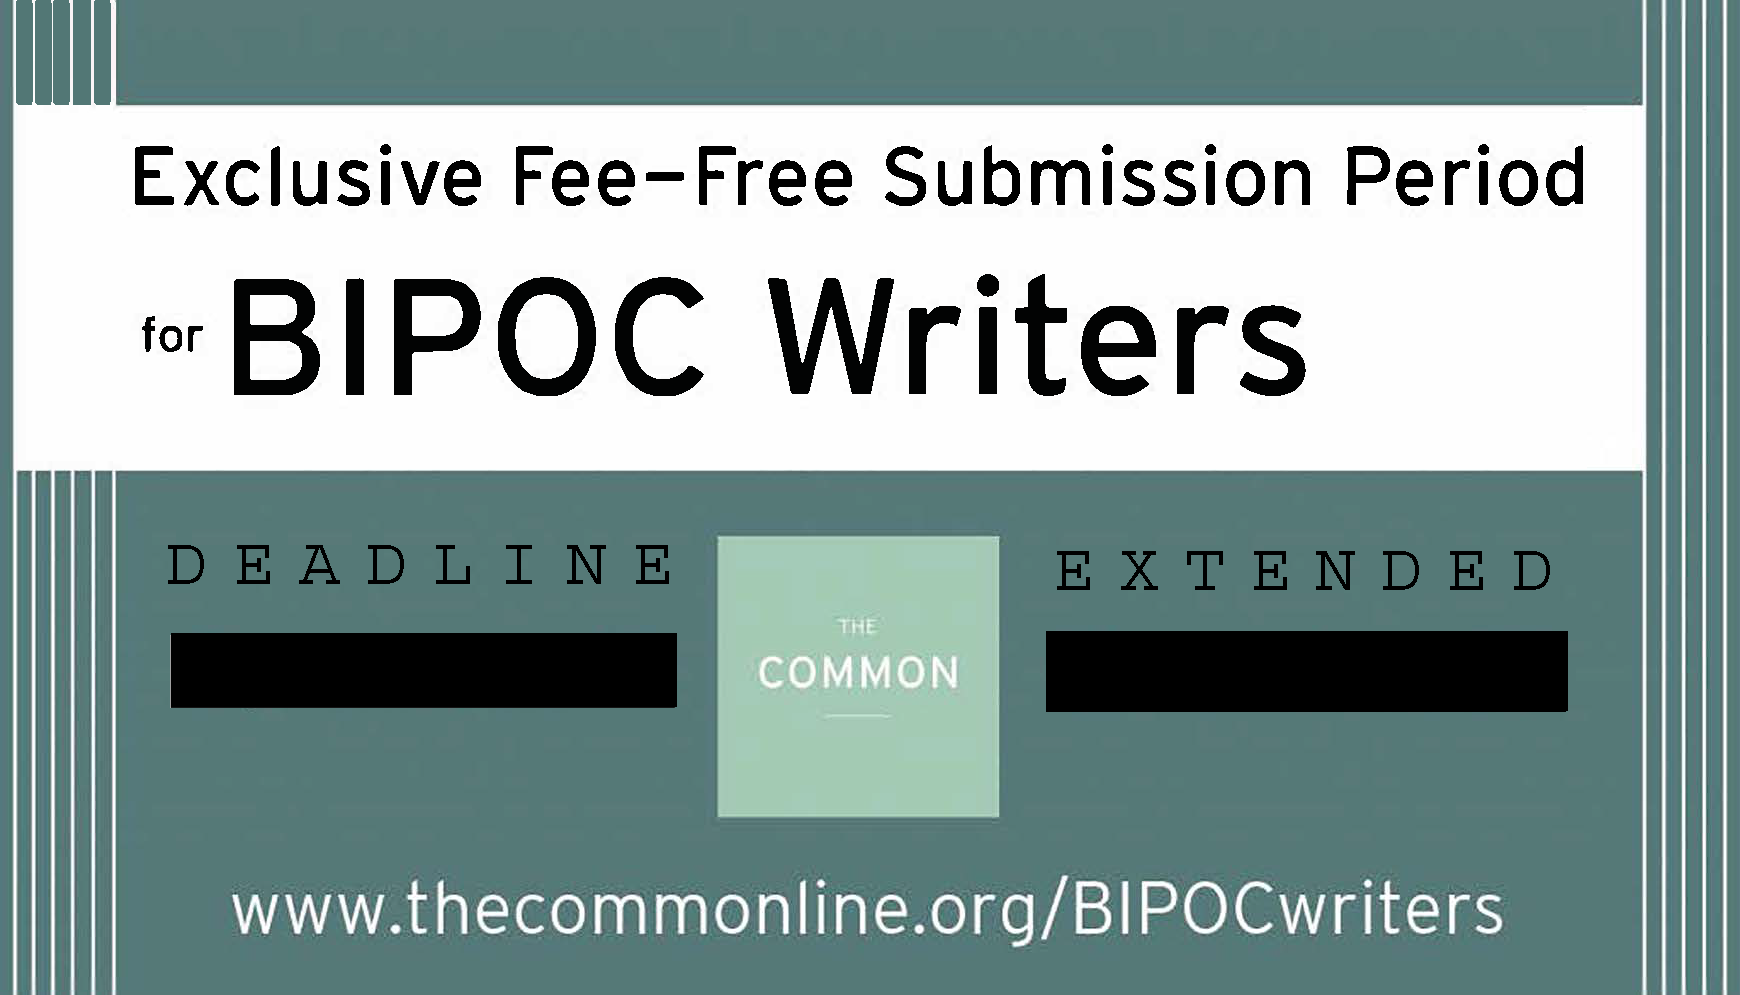 Exclusive Fee-Free Submission Period for BIPOC Writers